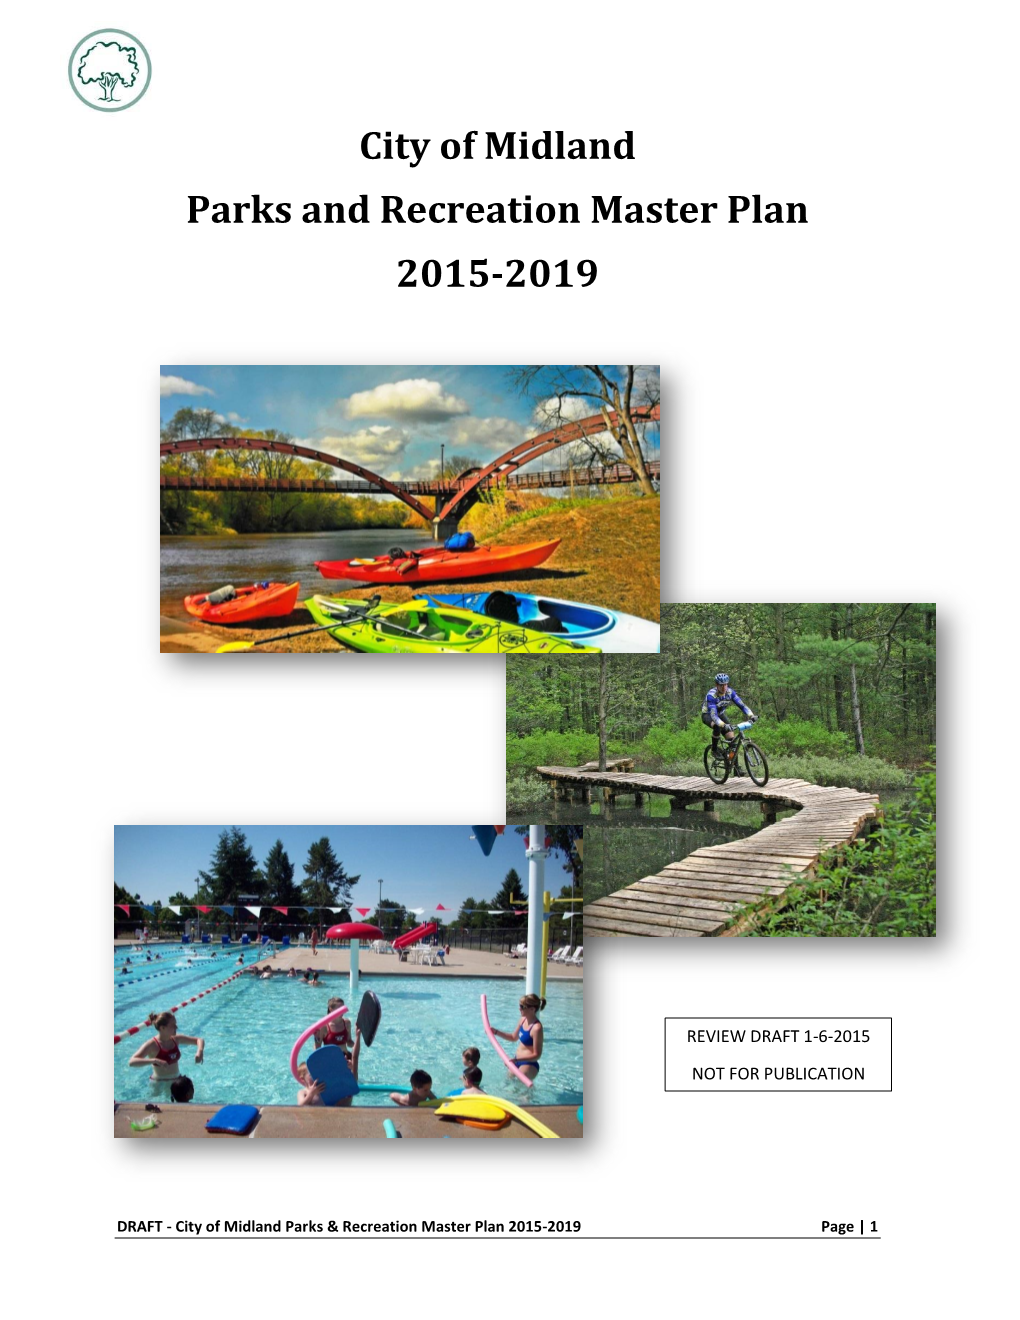 City of Midland Parks and Recreation Master Plan 2015-2019